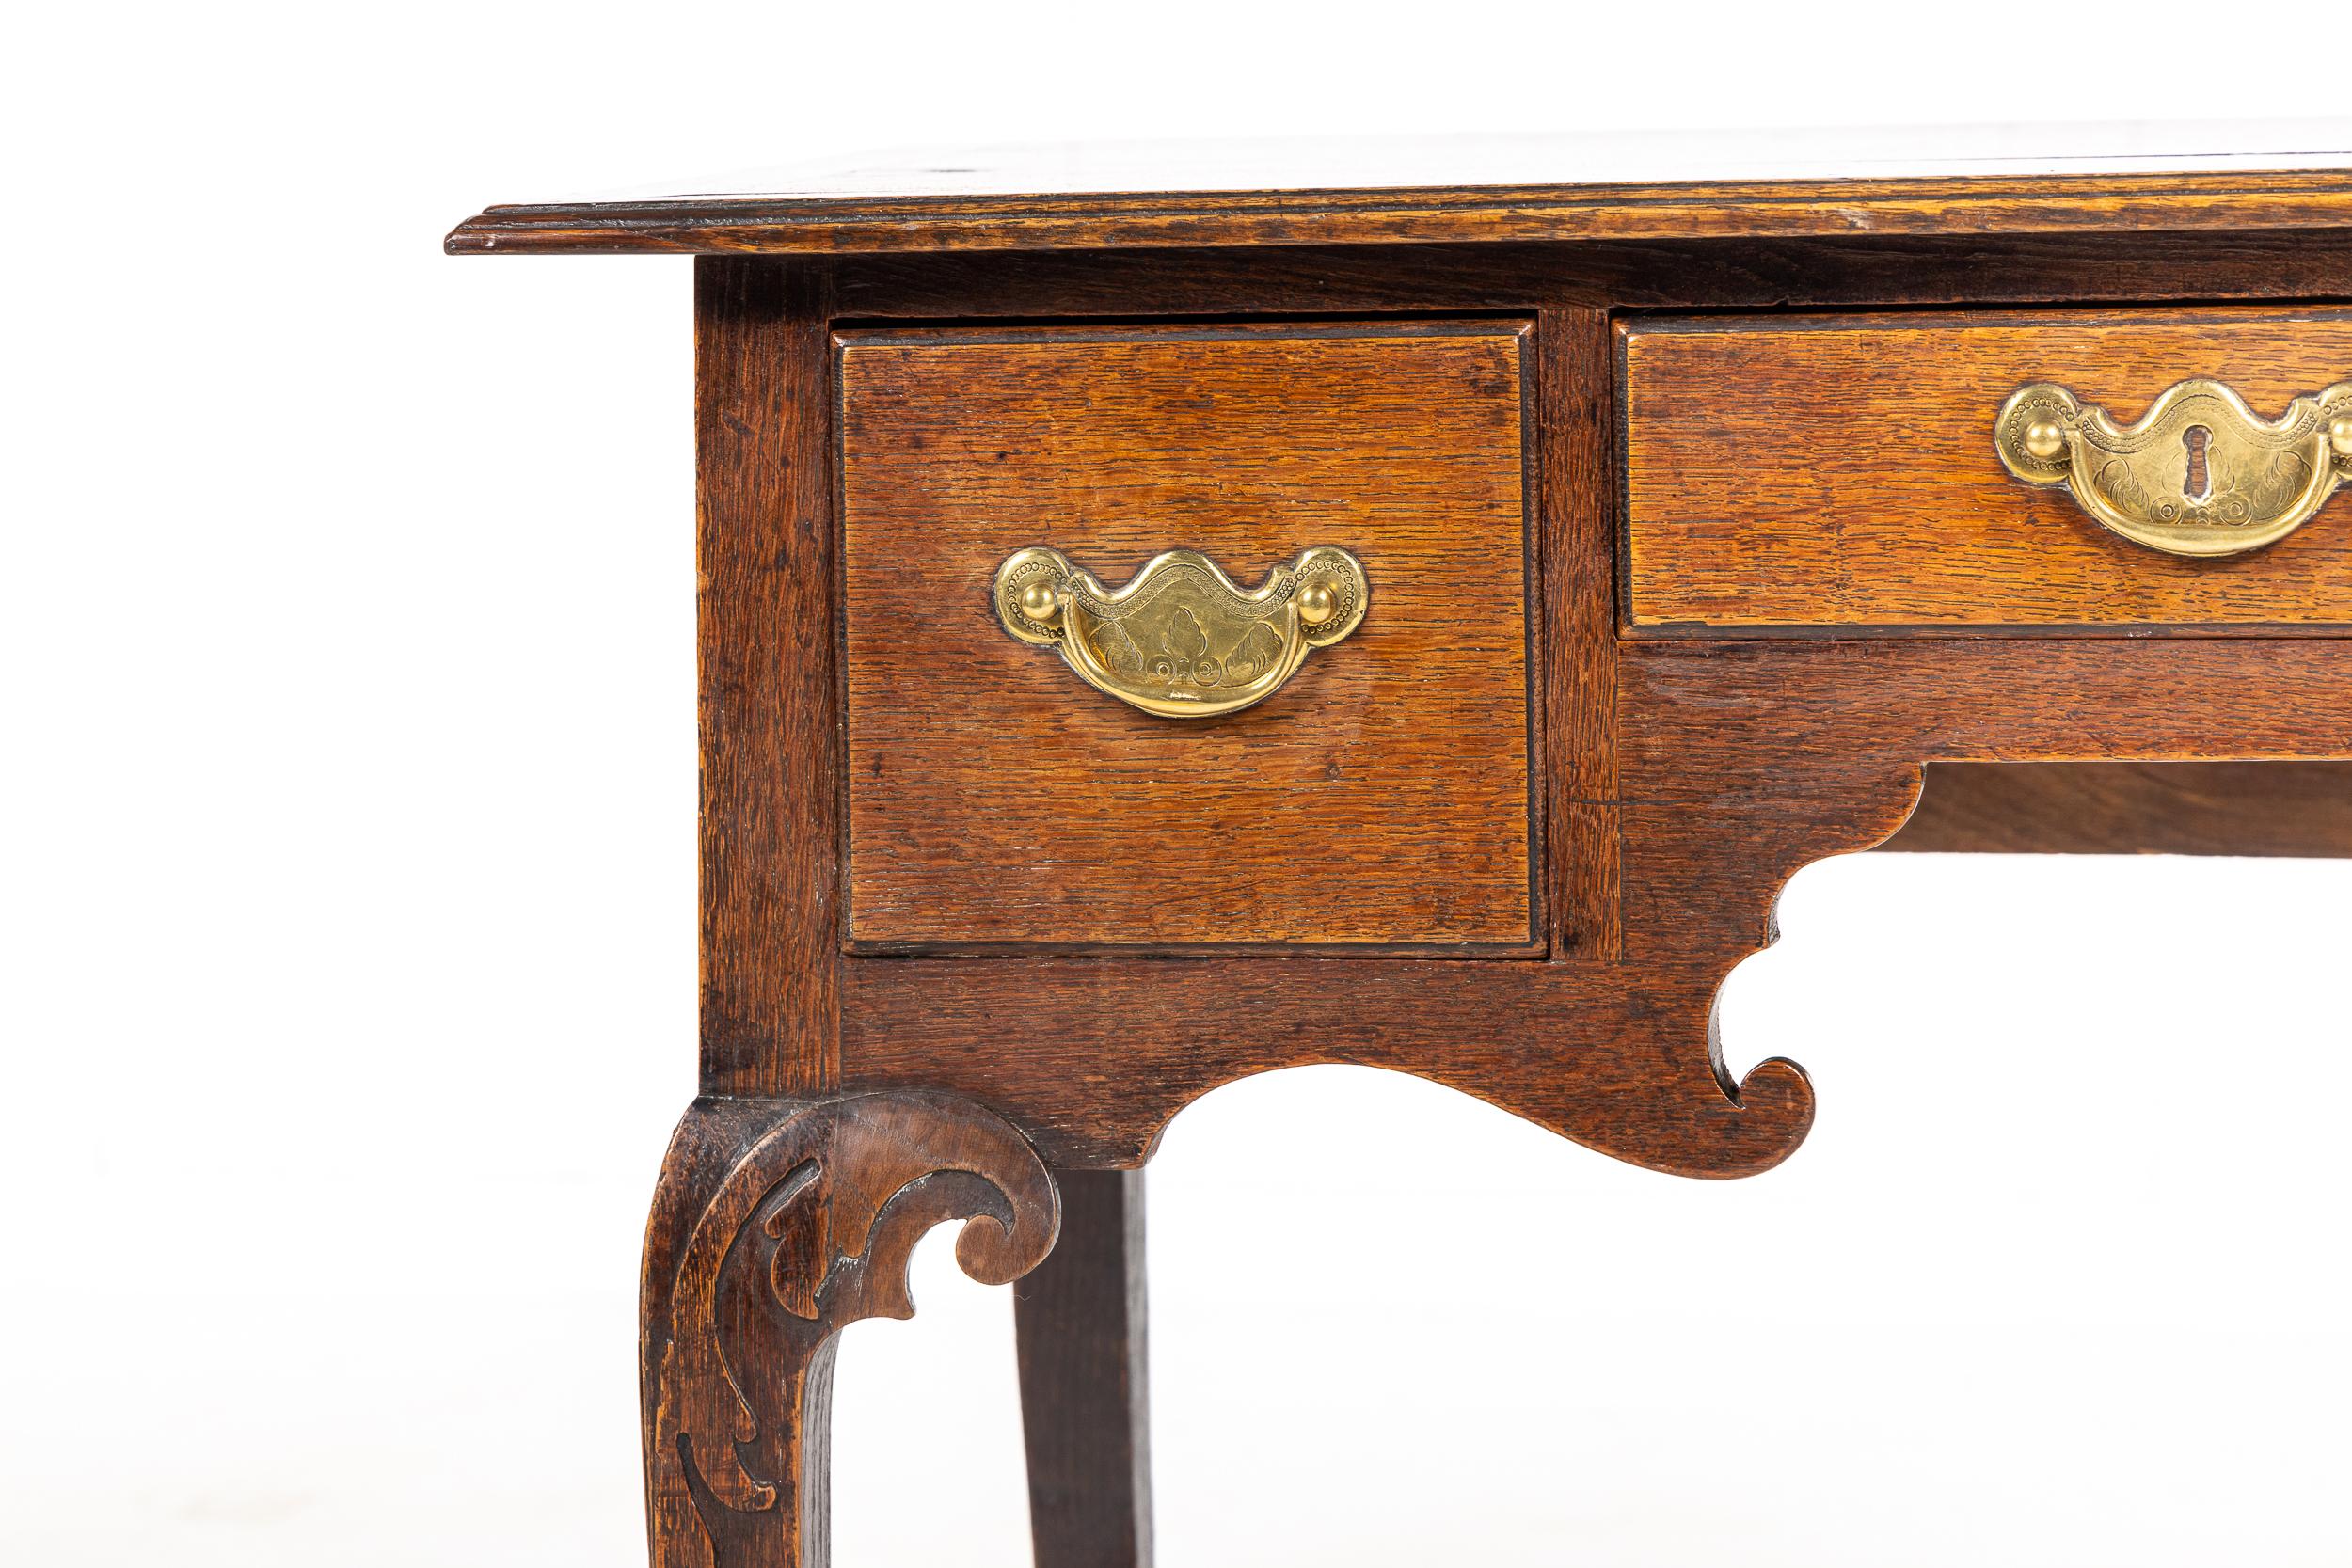 18th century oak lowboy with moulded edge top. Having three drawers with original brass handles, with a lovely carved, shaped apron below. Raised on long, shapely cabriole legs with intricately carved knees terminating in pad feet.

Excellent